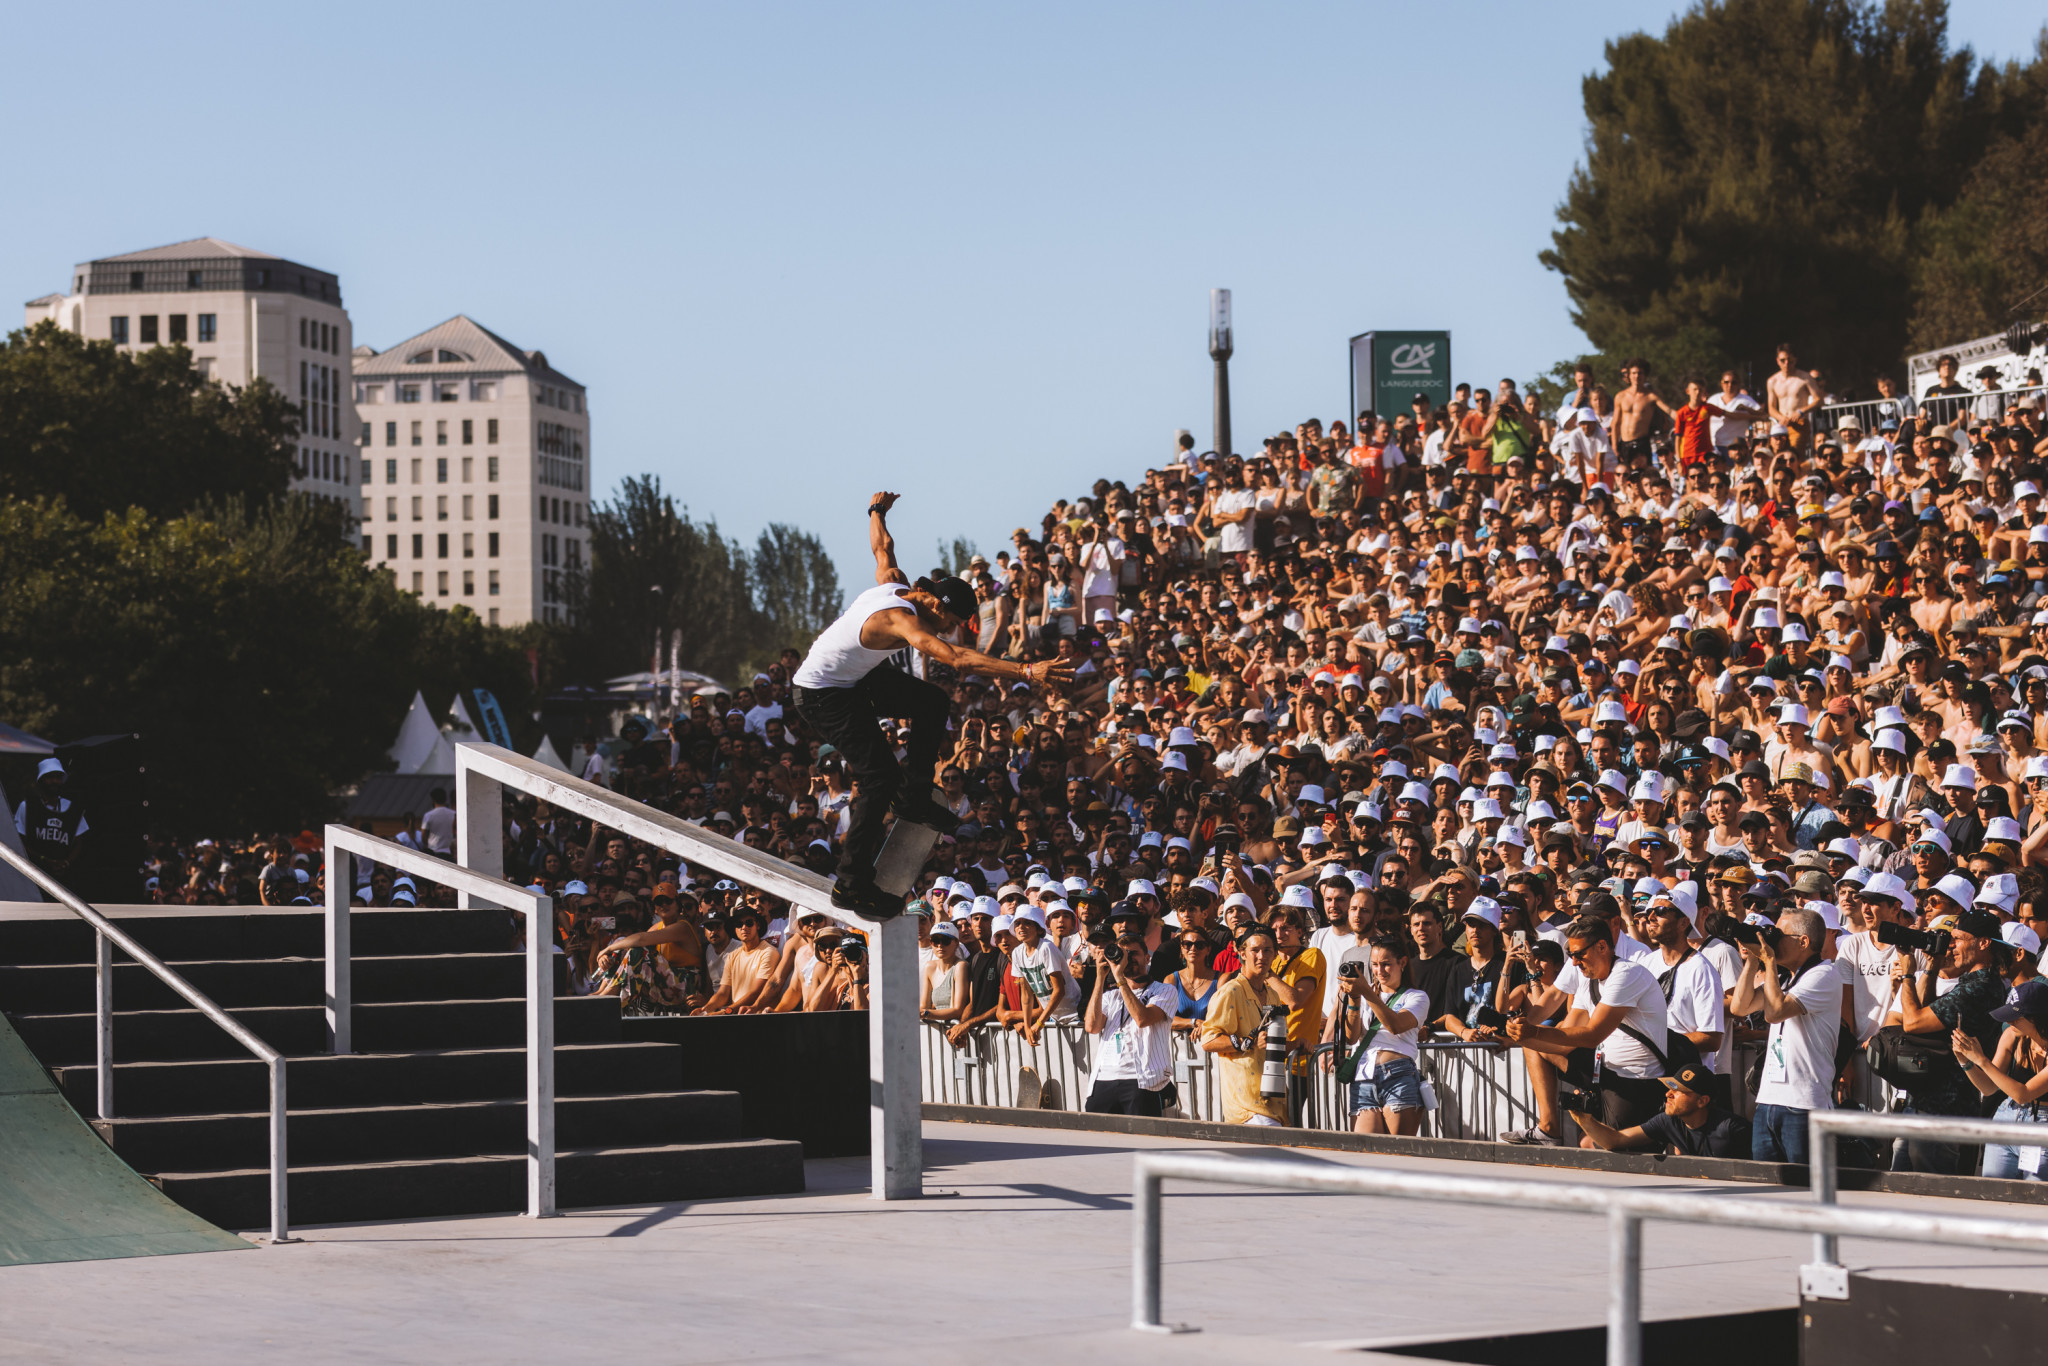 FISE looking to increase skateboarding prize money to attract top athletes